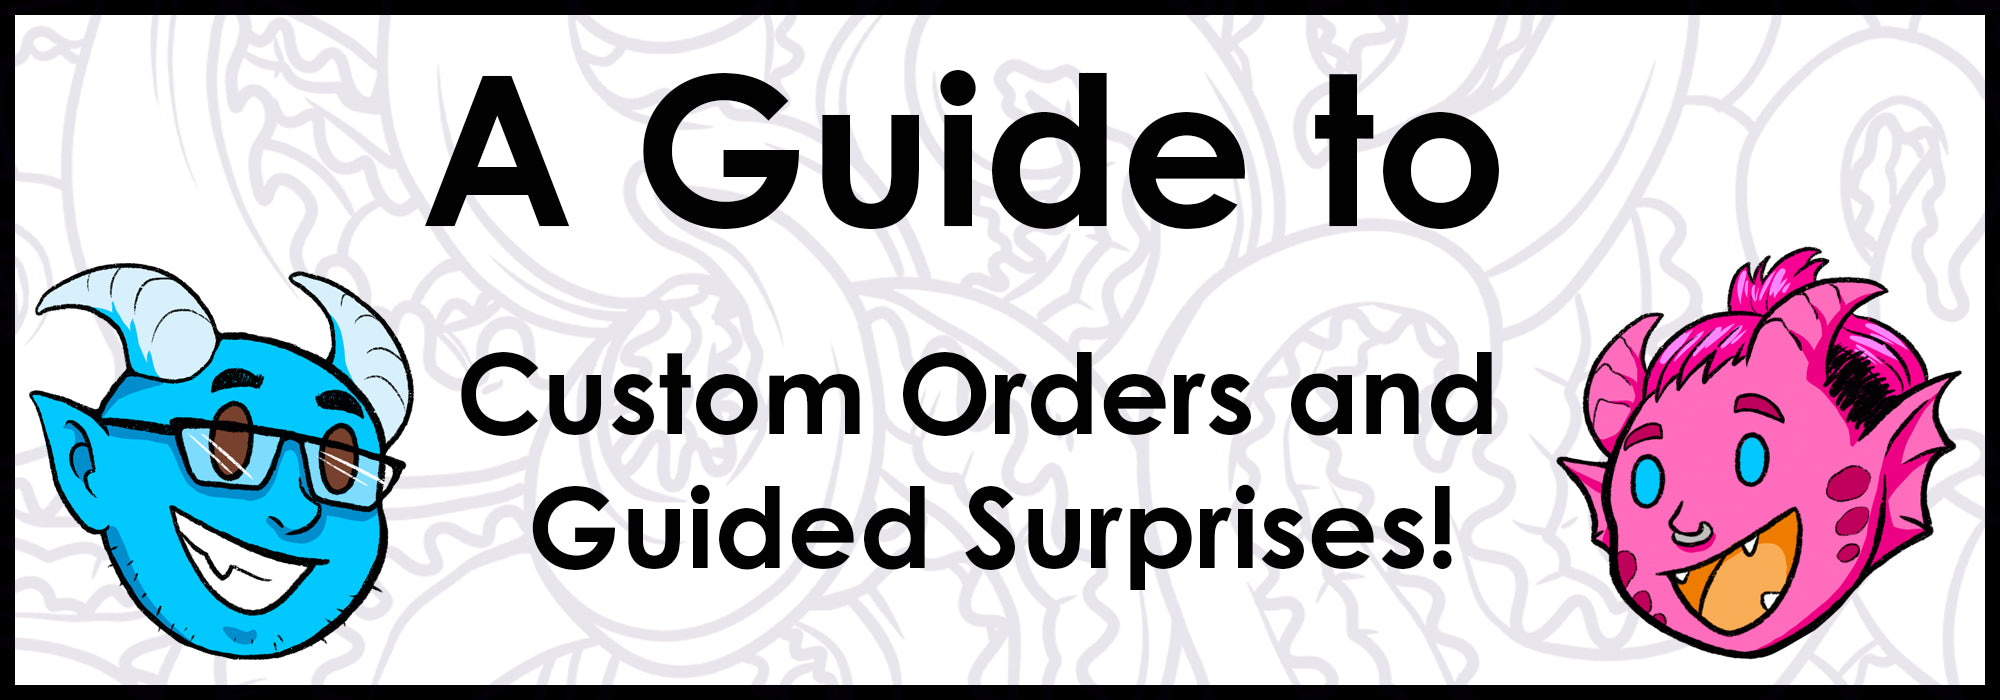 A Guide to Guided Surprises and Custom Orders